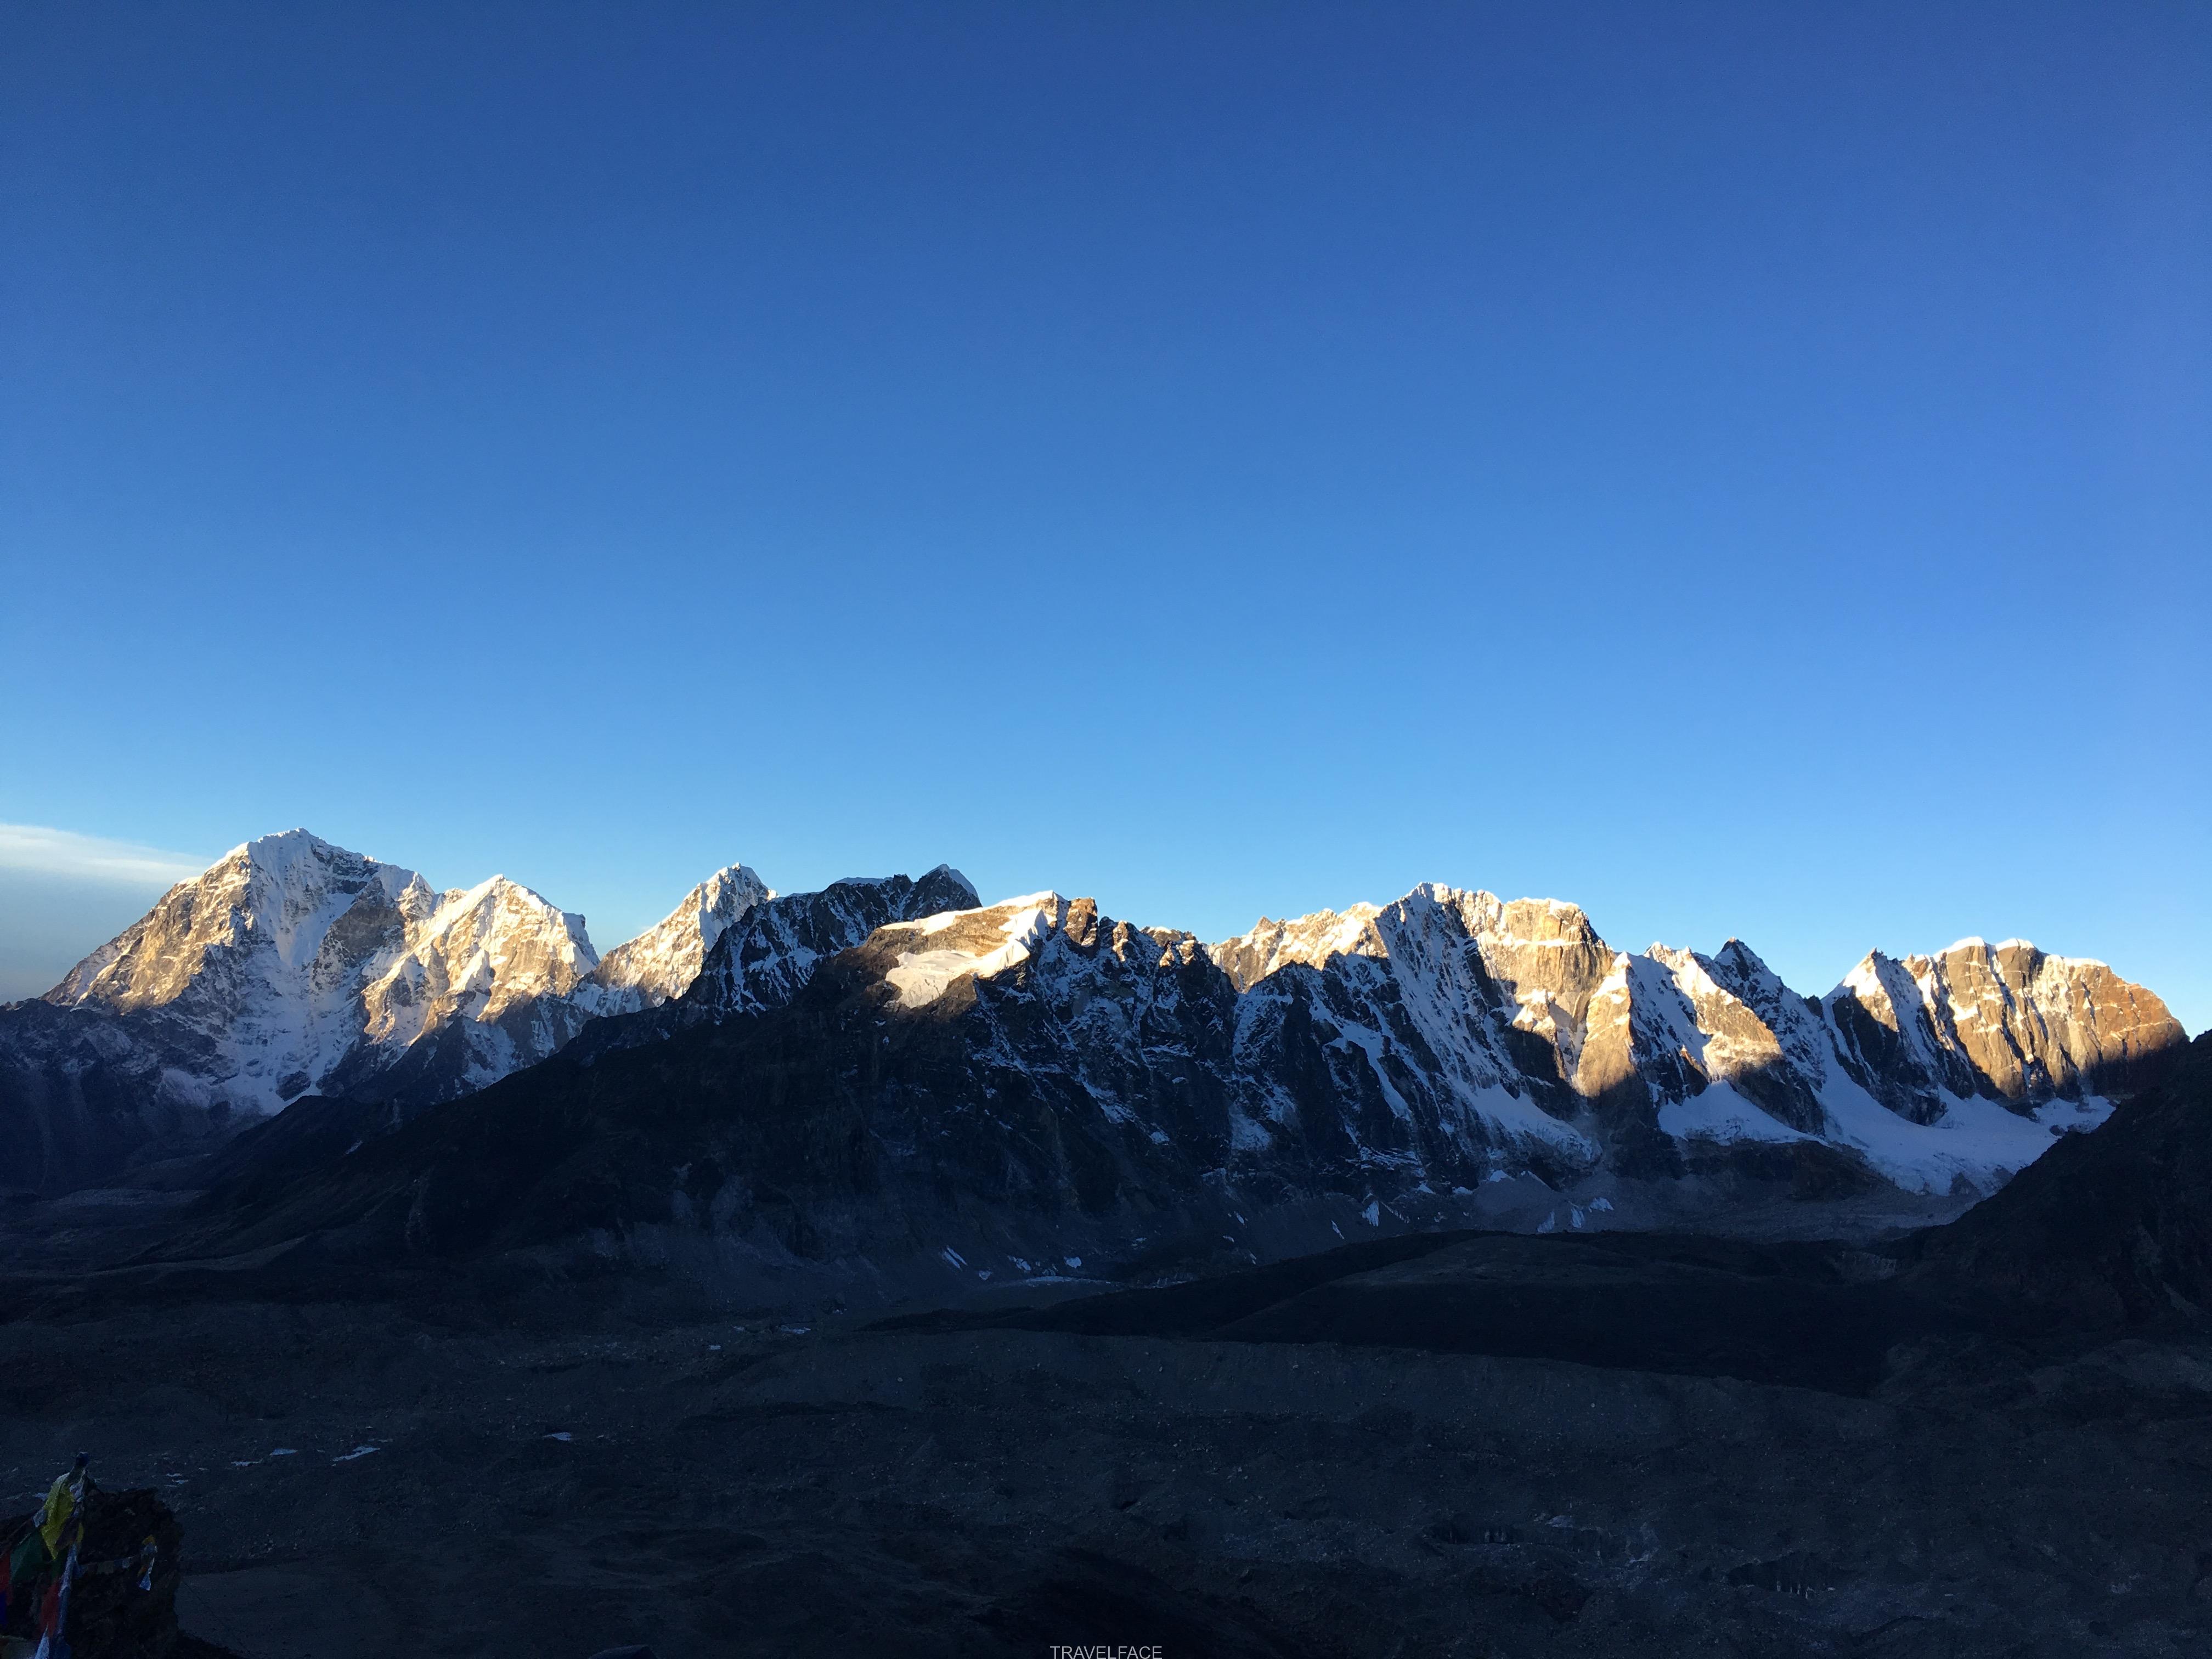 Sunrise over Everest and the surrounding mountains